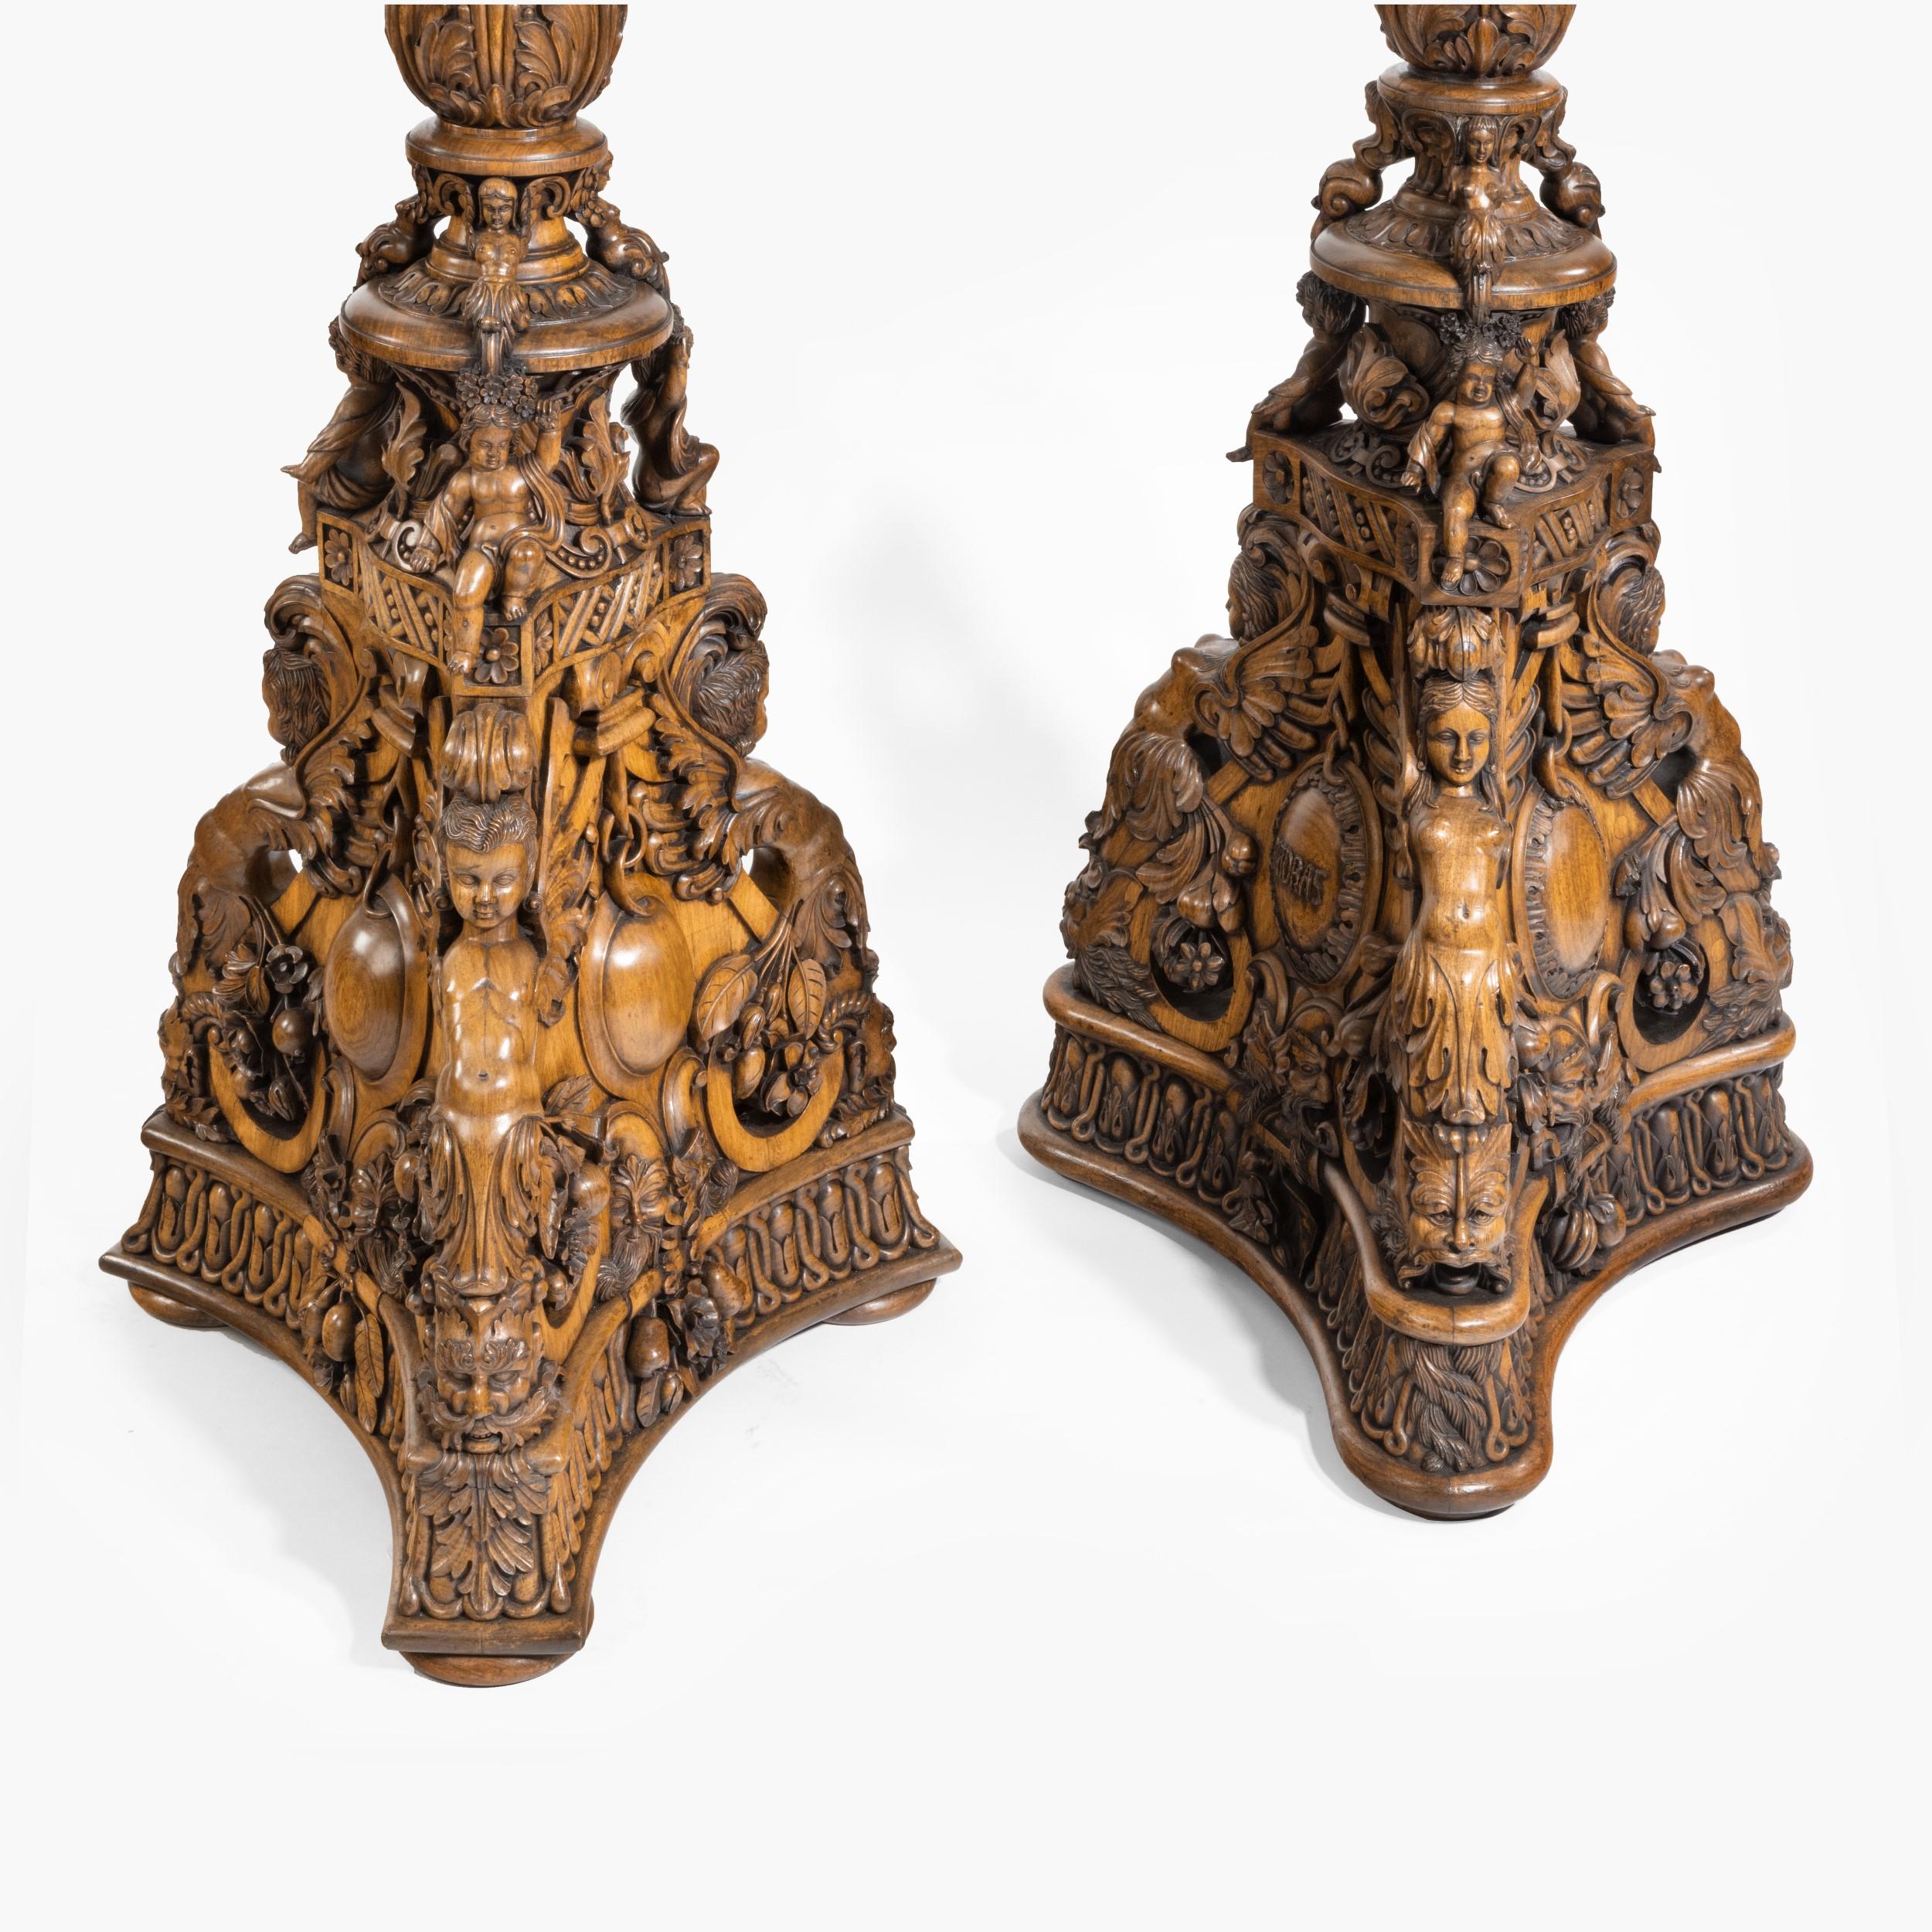 A magnificent pair of Anglo-Indian jardinière pedestals

Constructed in a flamboyantly and expertly carved teak, the bases of incurved triangular form, with putti supporting the foliate ring turned extensively carved columns, which in turn support